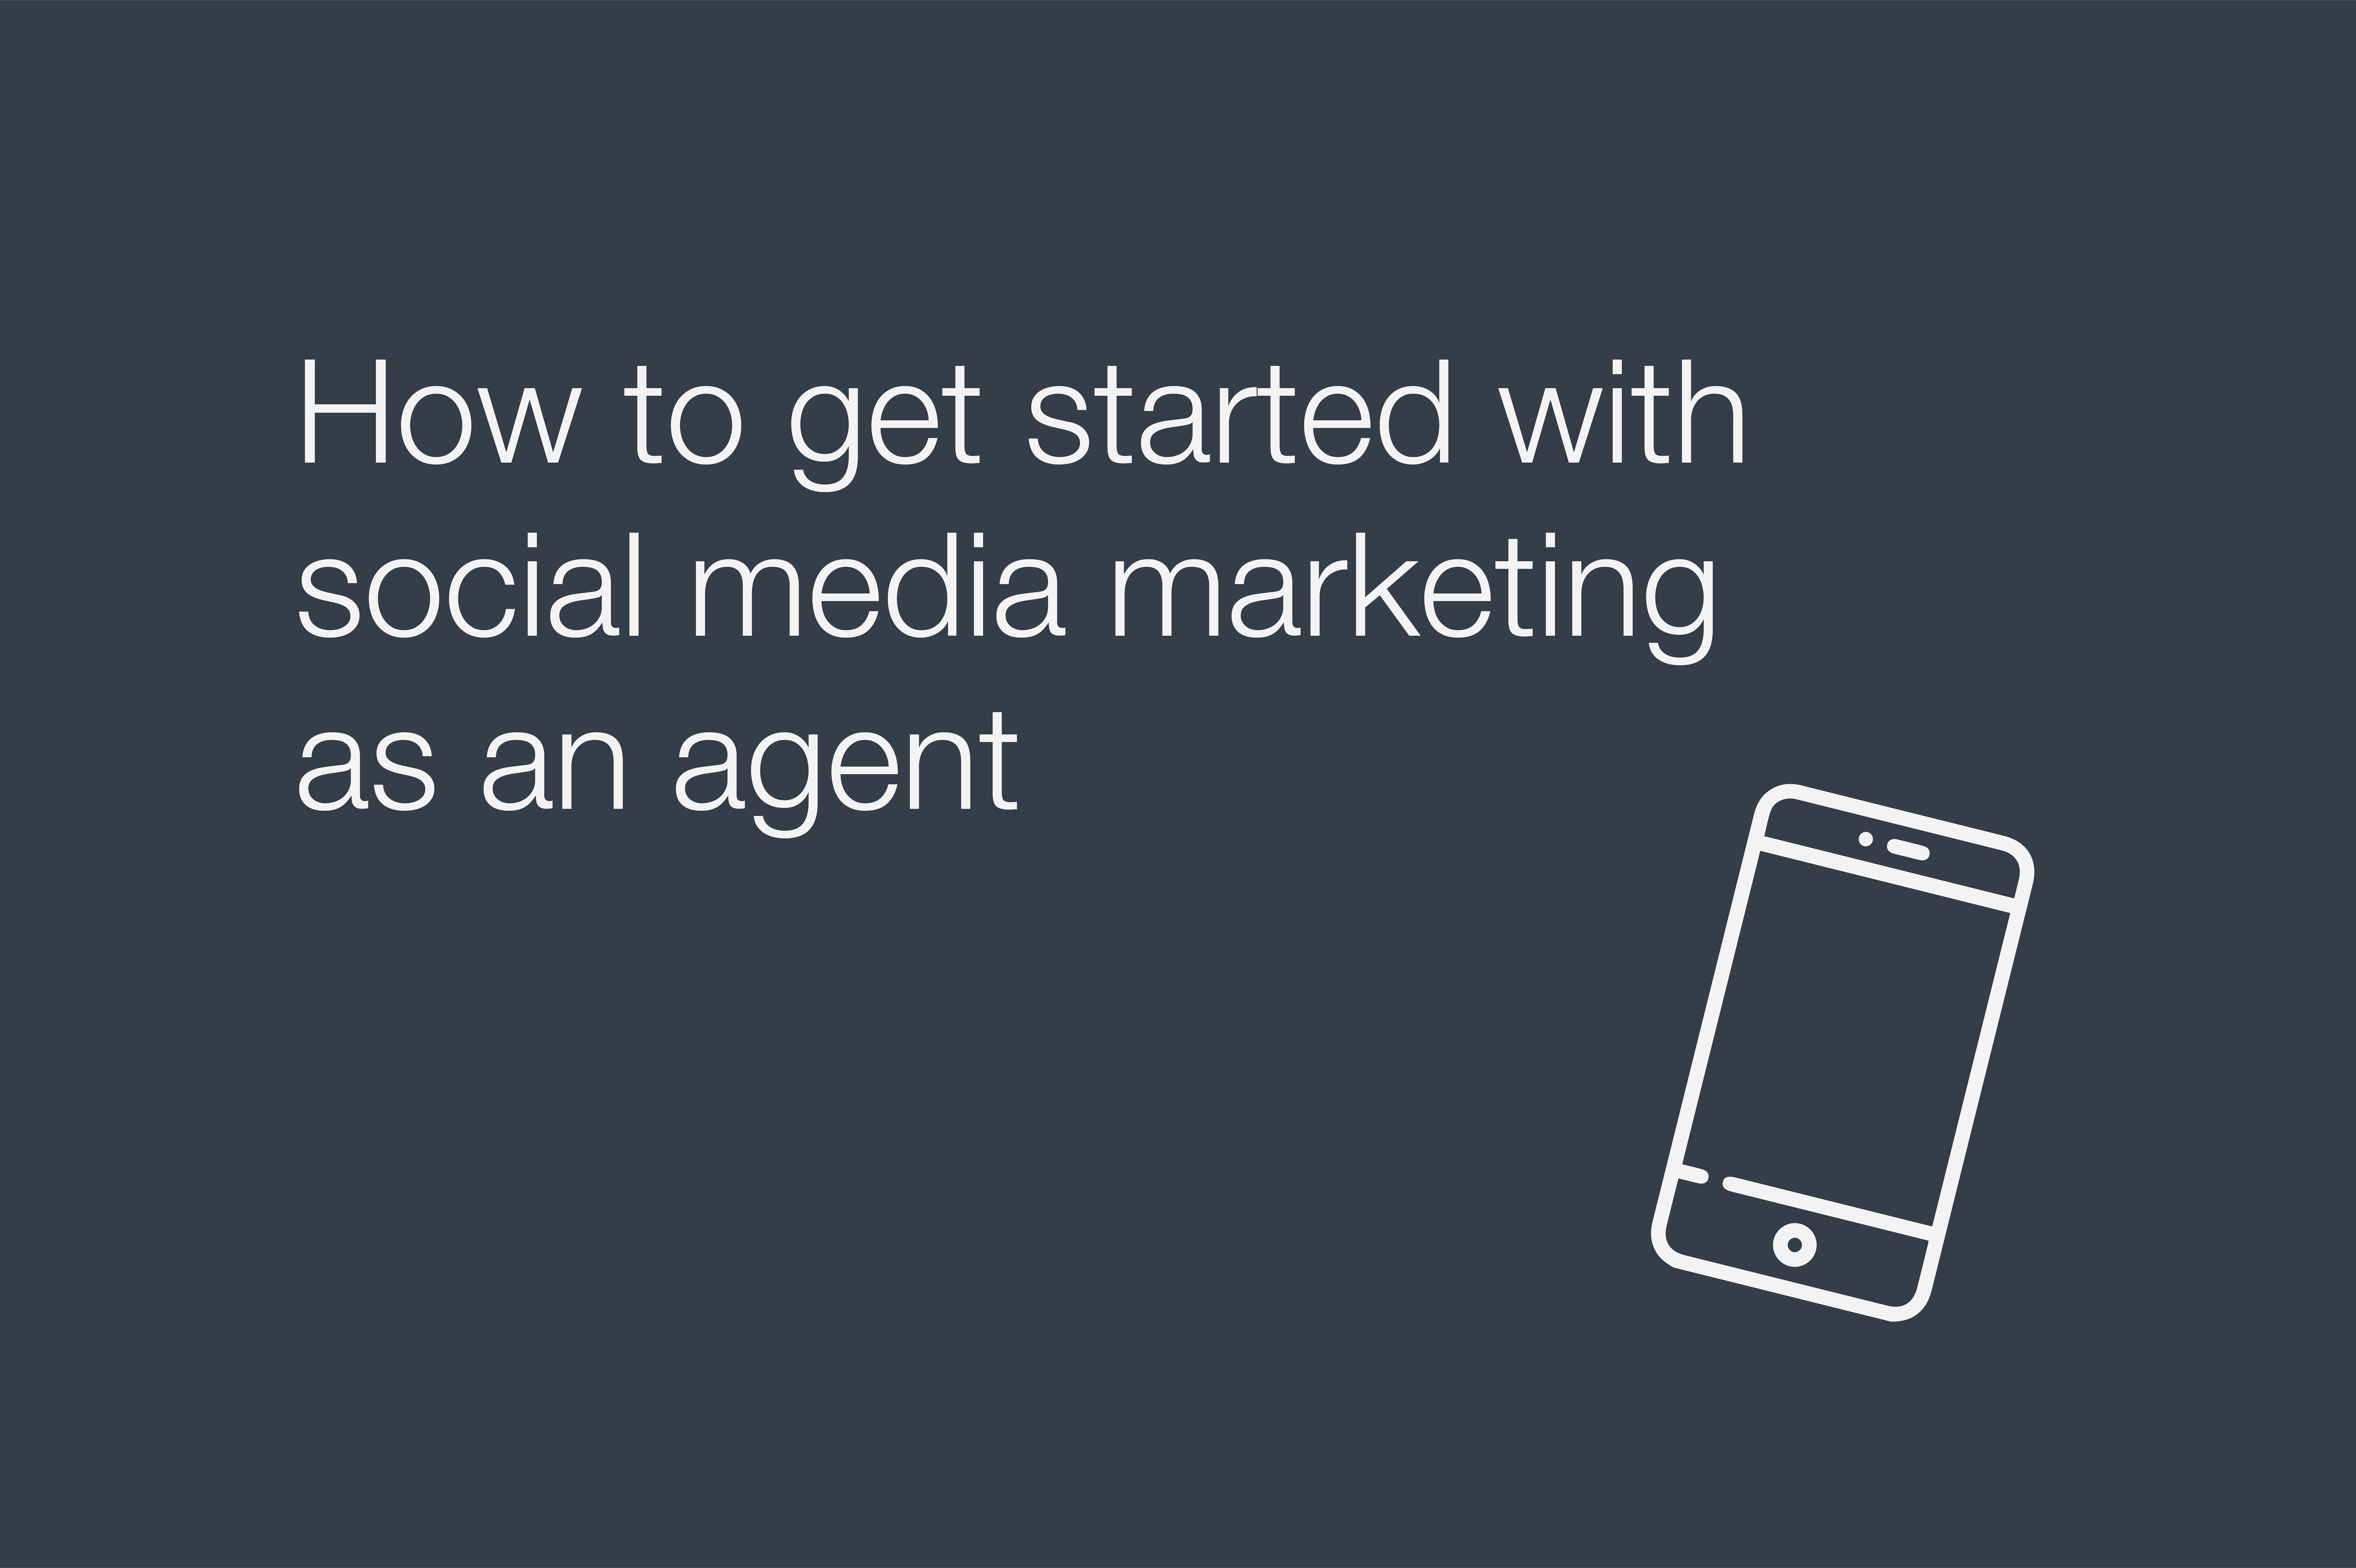 How to get started with social media marketing as an agent